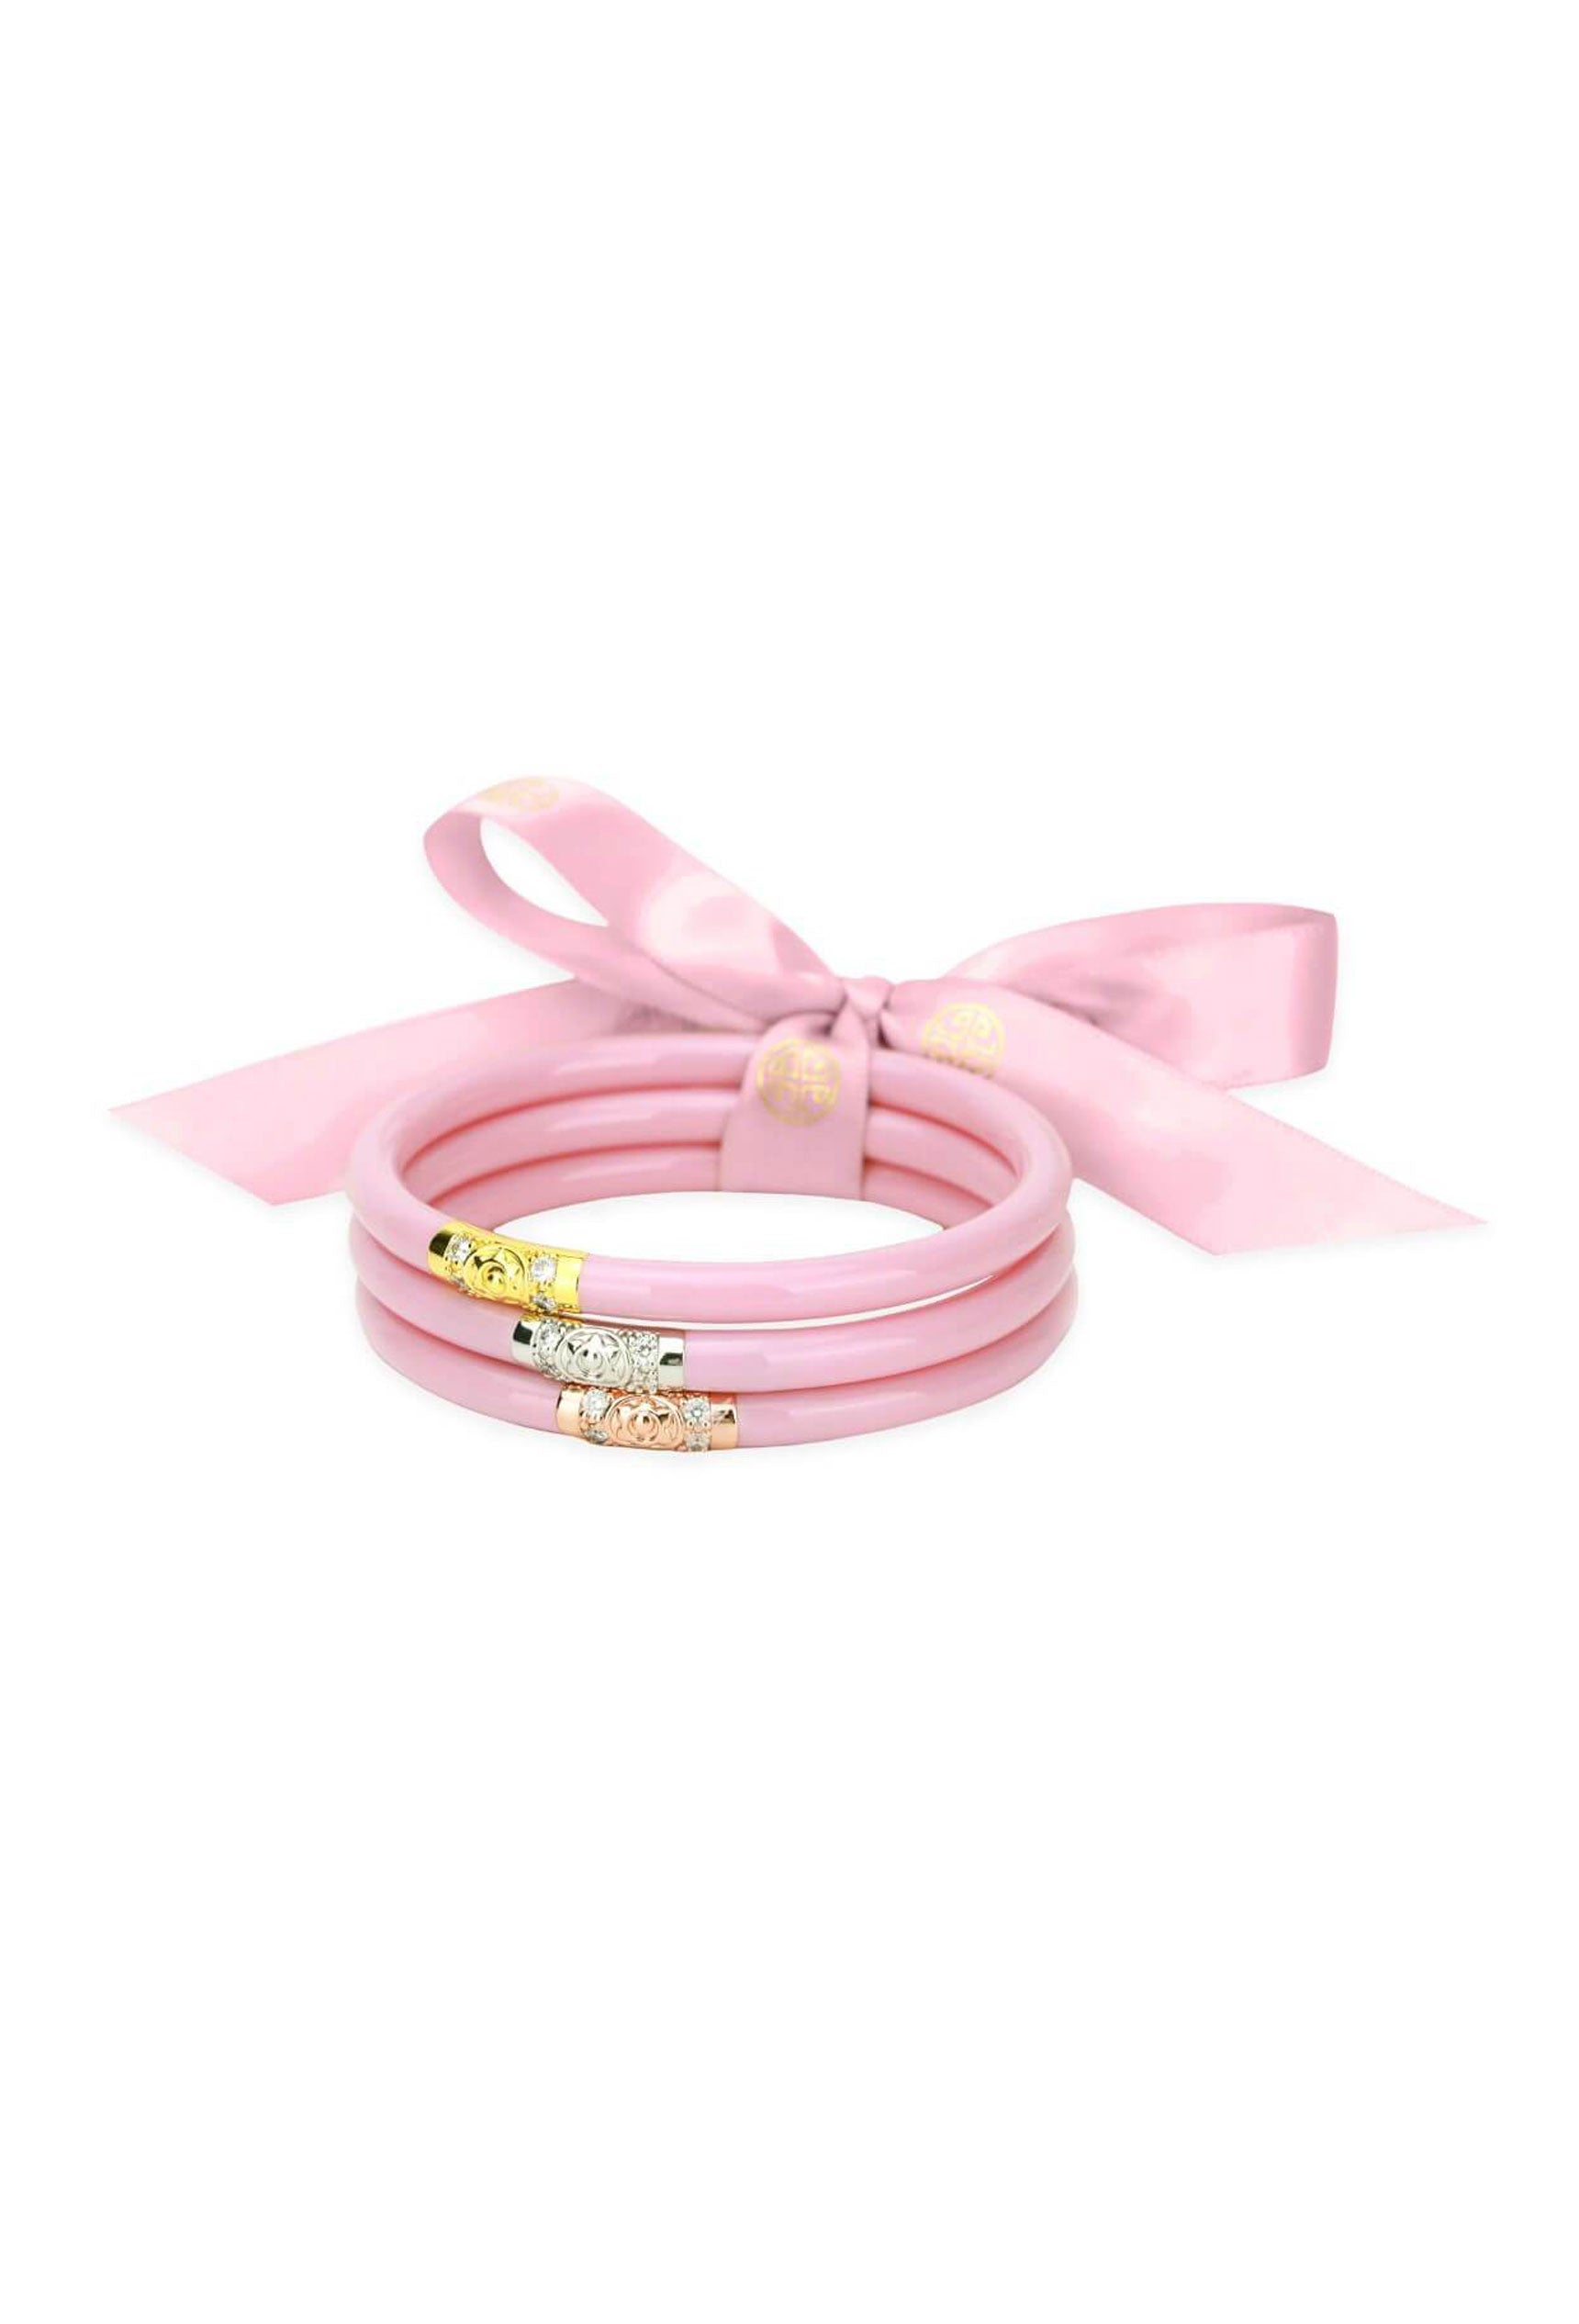 Budhagirl All Weather Bangles in Pink, Three Kings All Weather Bangles in Pink, Budhagirl Three Kings Bangles